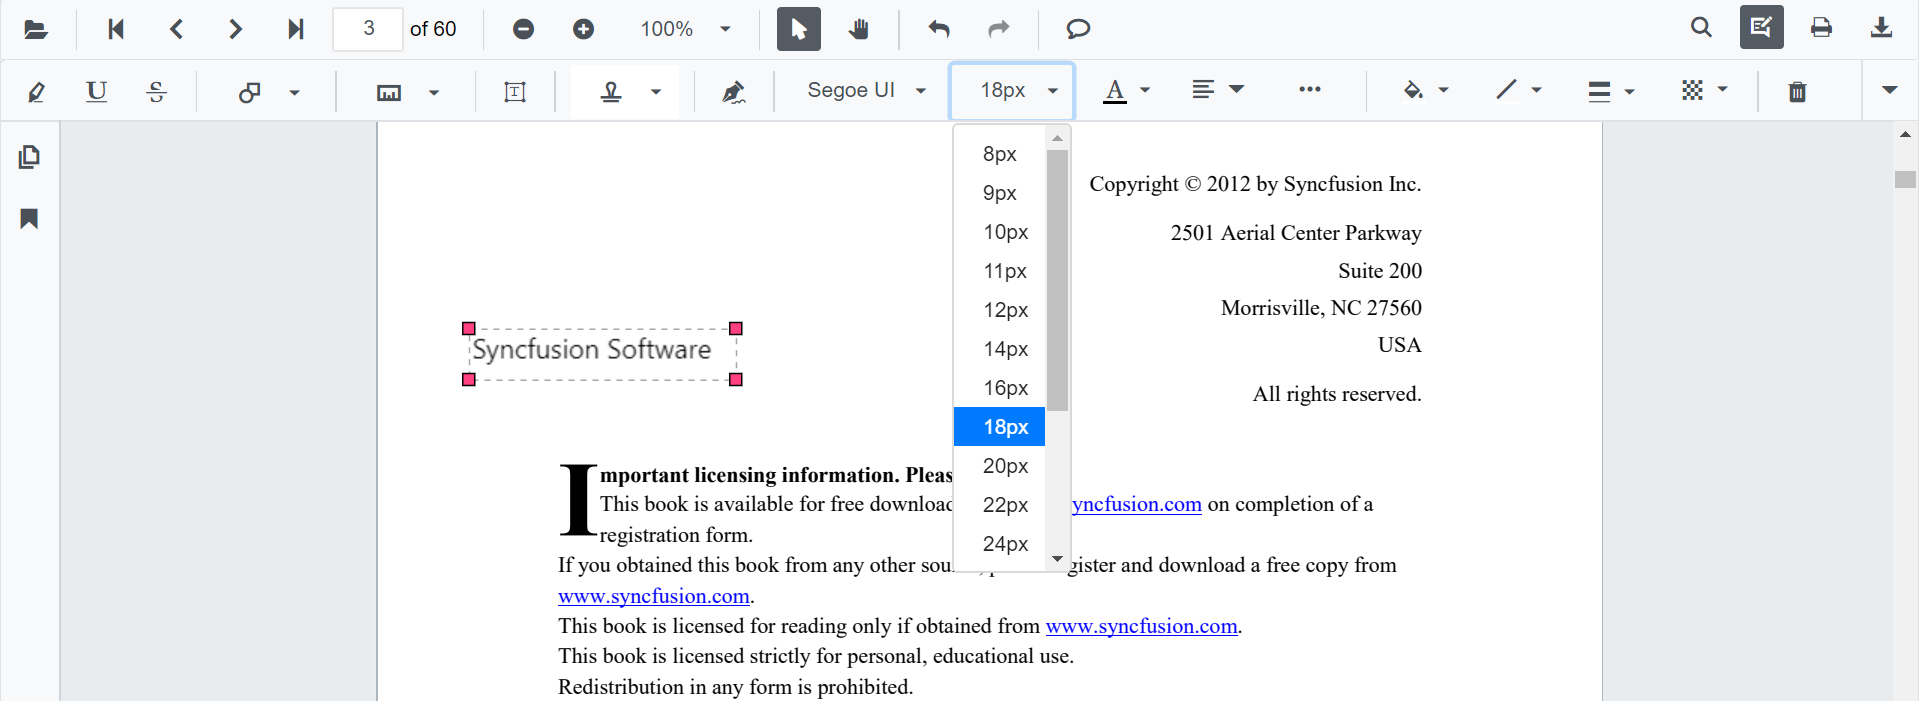 Editing Font Size of Blazor PDFViewer Text